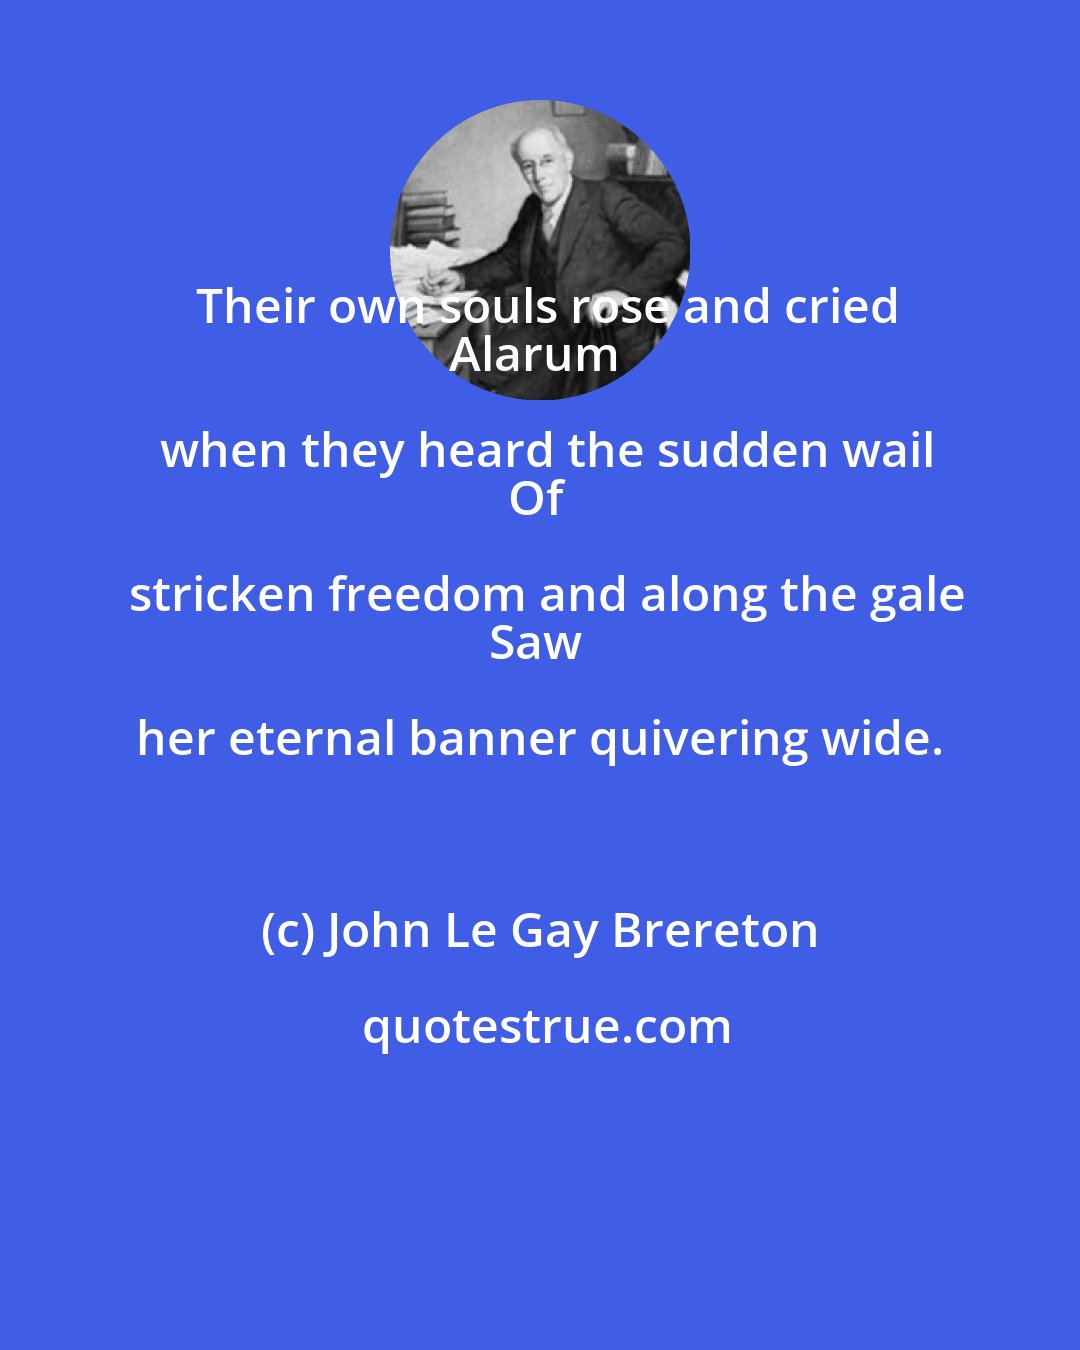 John Le Gay Brereton: Their own souls rose and cried
Alarum when they heard the sudden wail
Of stricken freedom and along the gale
Saw her eternal banner quivering wide.